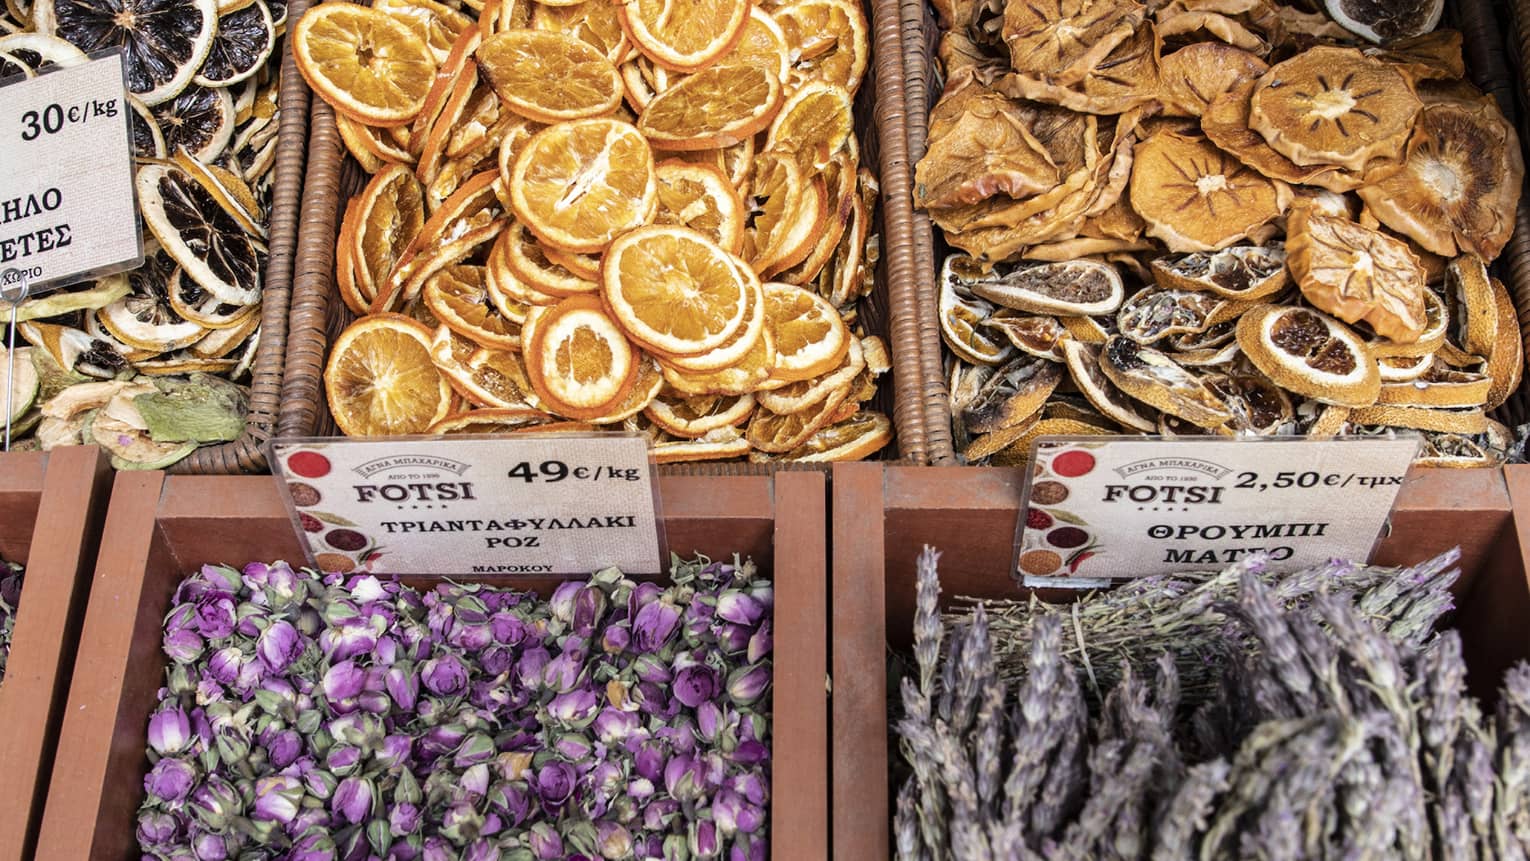 Dried orange slices and purple rose buds, lavender bundles and cinnamon sticks displayed for sale in wooden and wicker boxes.